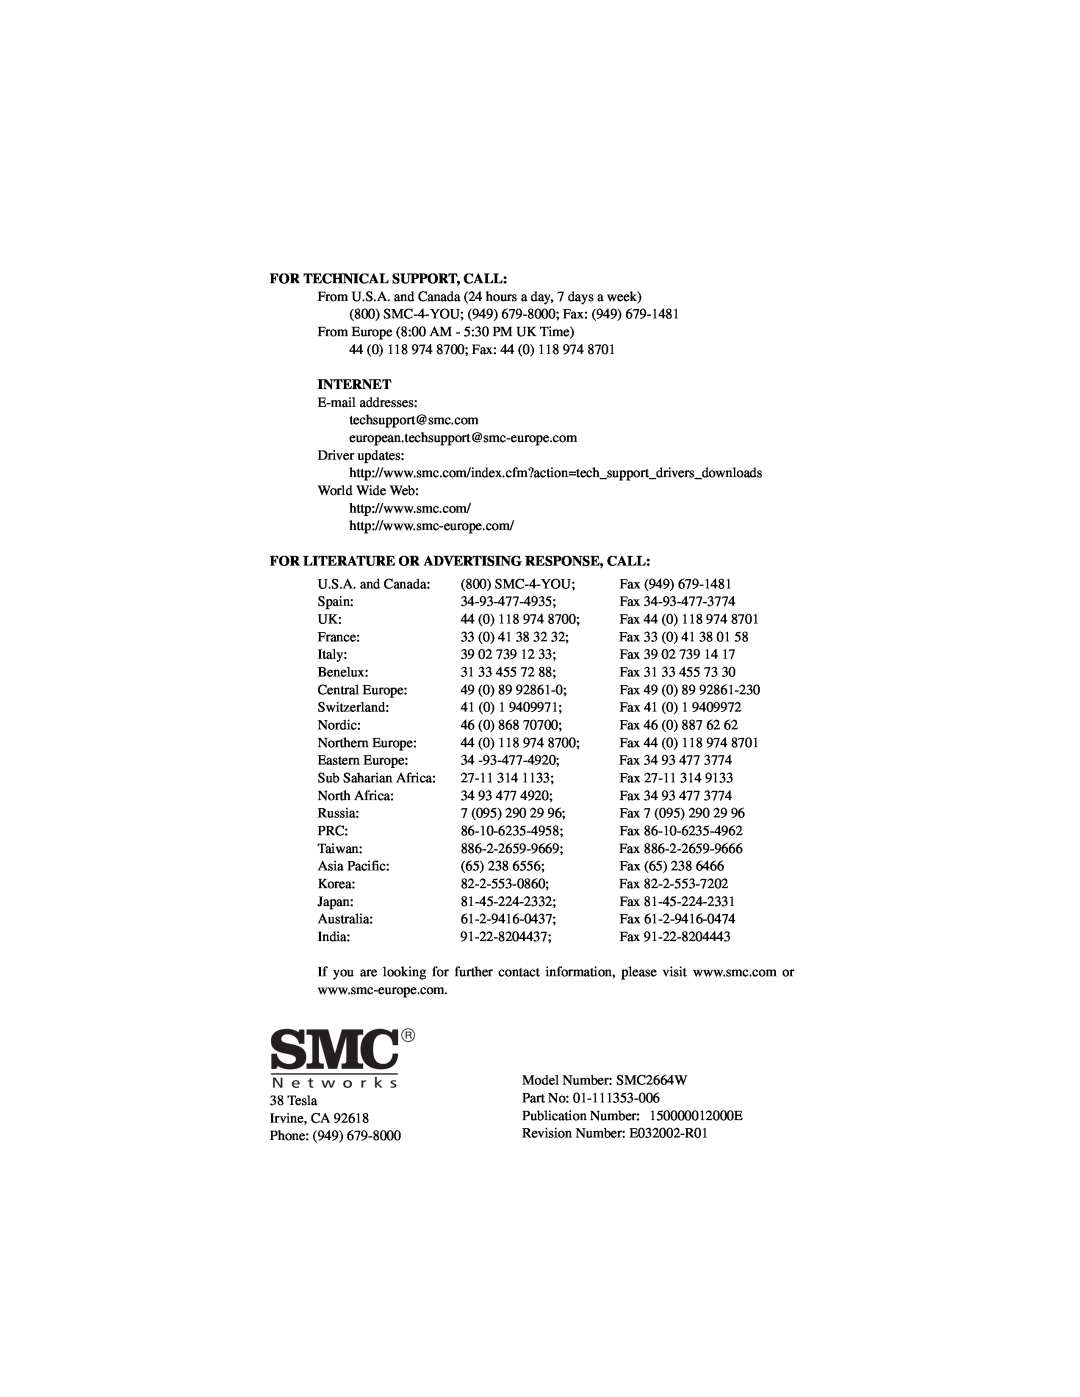 SMC Networks SMC2664W manual For Technical Support, Call, Internet, For Literature Or Advertising Response, Call 